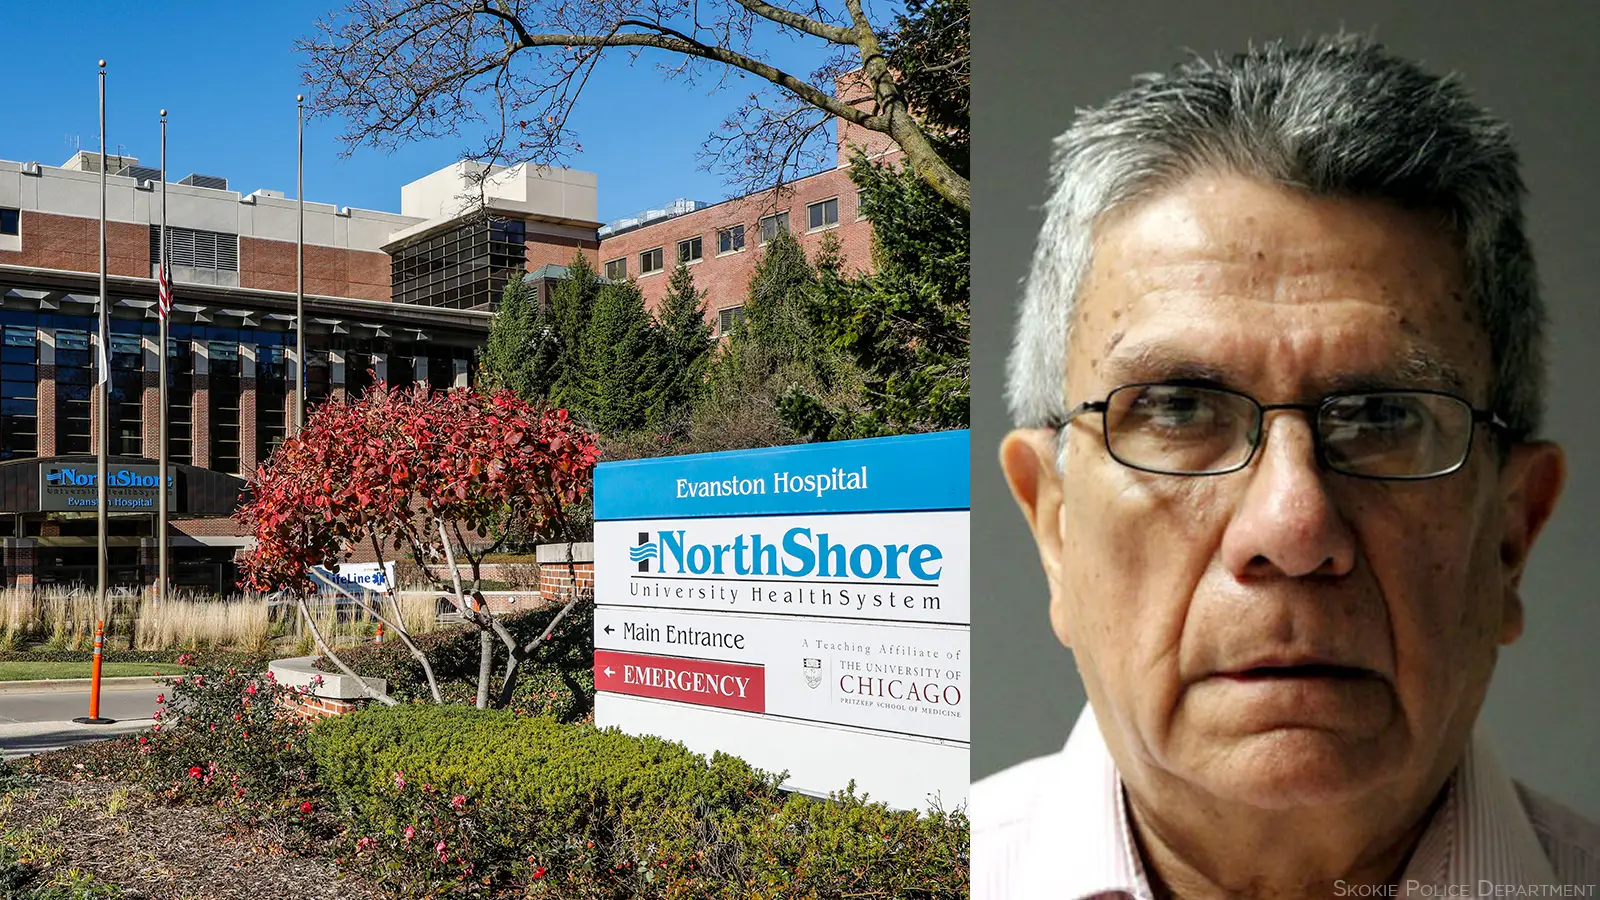 New cases reveal suspected sexual abuse by two Illinois doctors. What patients should know.